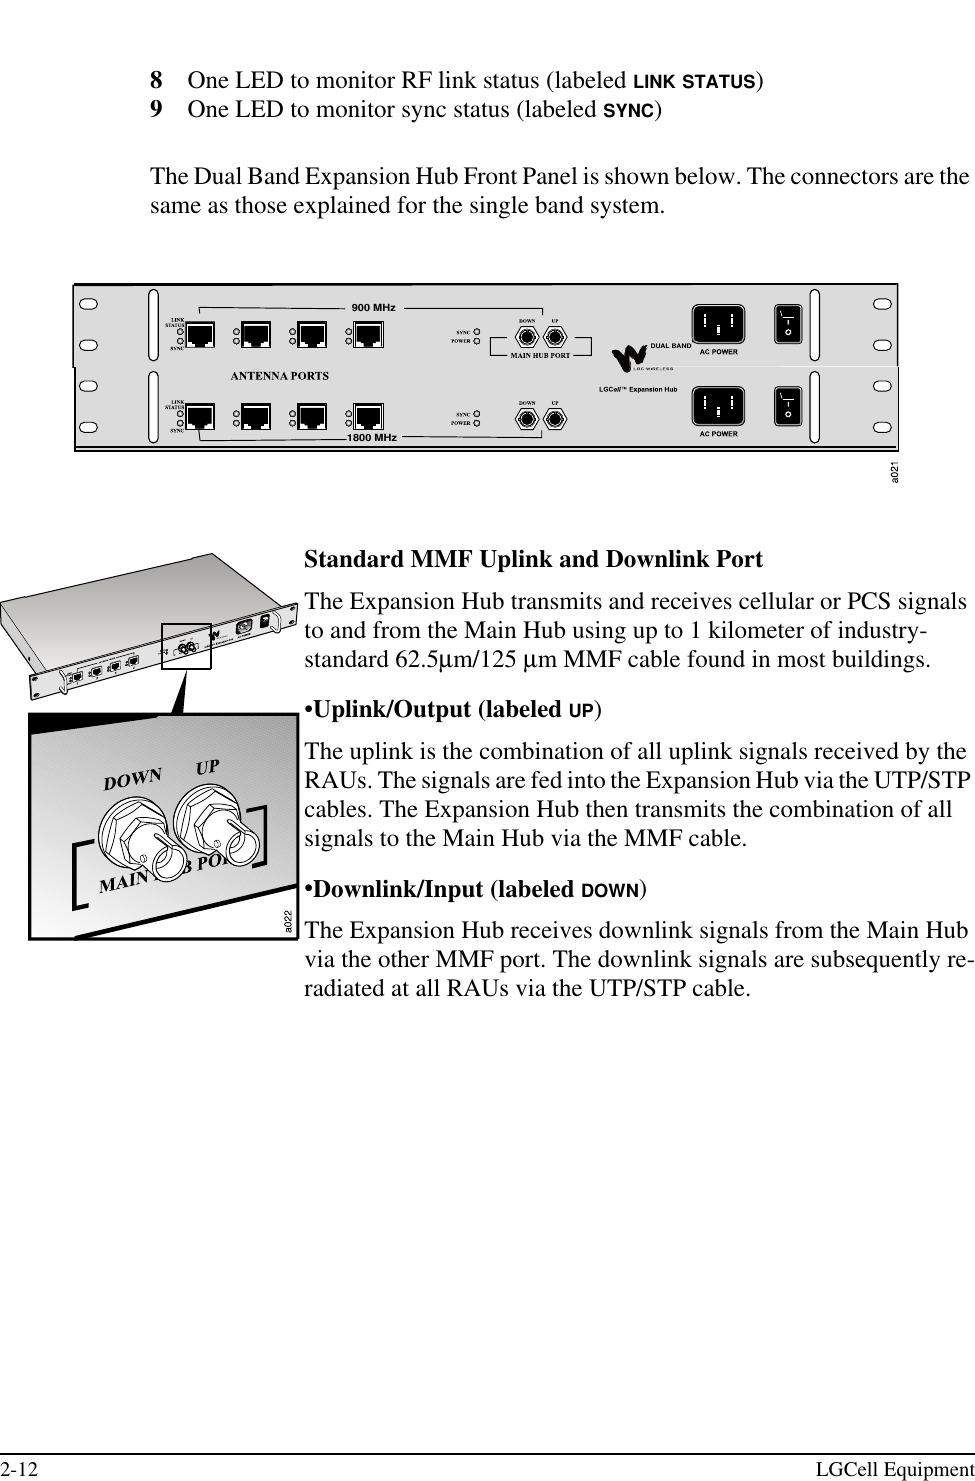 2-12 LGCell Equipment8One LED to monitor RF link status (labeled LINK STATUS)9One LED to monitor sync status (labeled SYNC)The Dual Band Expansion Hub Front Panel is shown below. The connectors are the same as those explained for the single band system.Standard MMF Uplink and Downlink PortThe Expansion Hub transmits and receives cellular or PCS signals to and from the Main Hub using up to 1 kilometer of industry-standard 62.5µm/125 µm MMF cable found in most buildings.•Uplink/Output (labeled UP)The uplink is the combination of all uplink signals received by the RAUs. The signals are fed into the Expansion Hub via the UTP/STP cables. The Expansion Hub then transmits the combination of all signals to the Main Hub via the MMF cable.•Downlink/Input (labeled DOWN)The Expansion Hub receives downlink signals from the Main Hub via the other MMF port. The downlink signals are subsequently re-radiated at all RAUs via the UTP/STP cable. DUAL BAND900 MHz1800 MHz